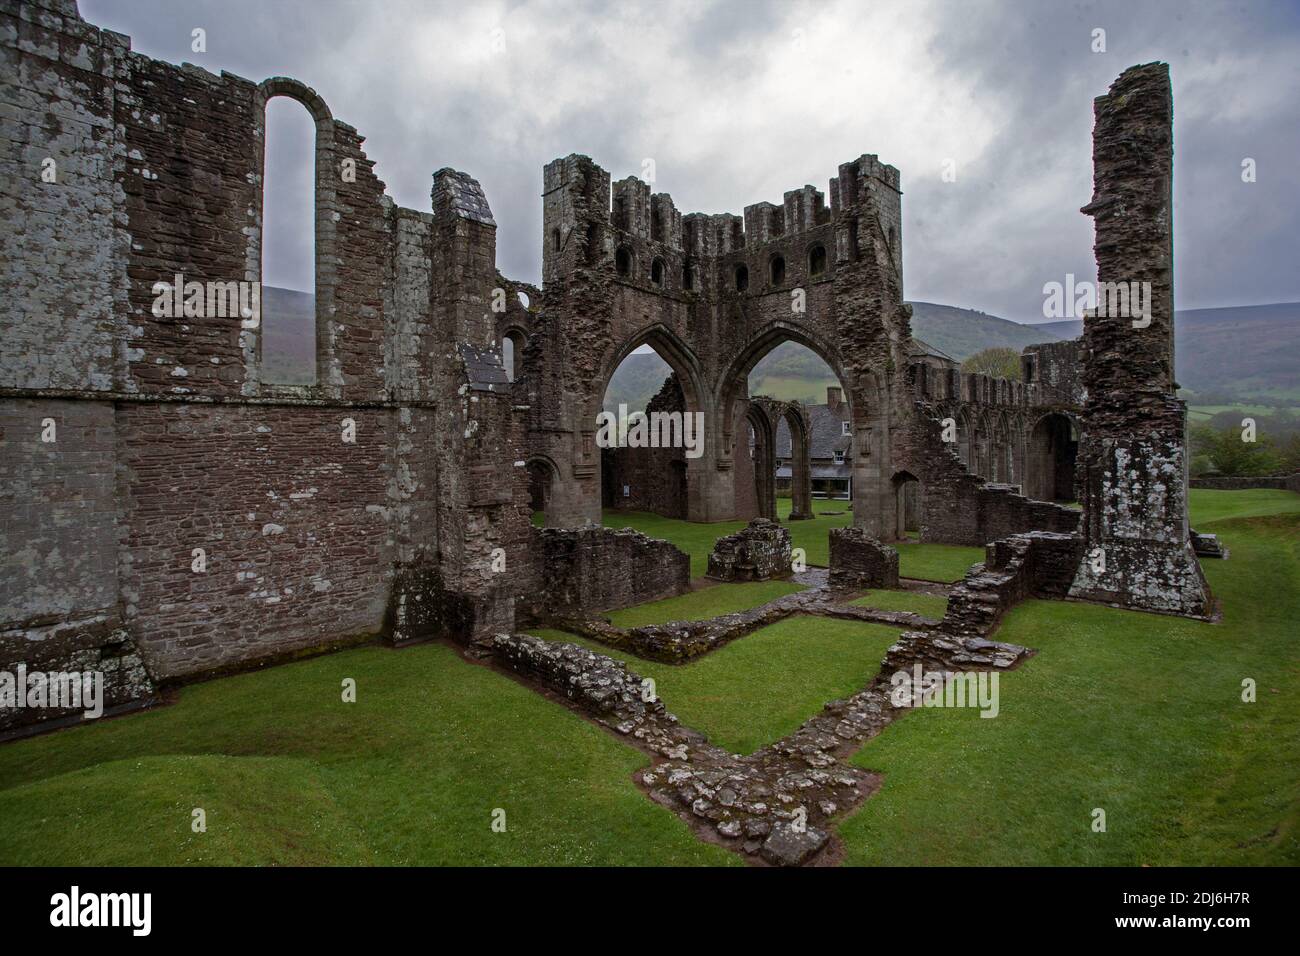 Llanthony Priory ,Brecon Beacons National Park in Monmouthshire, south east Wales. Stock Photo